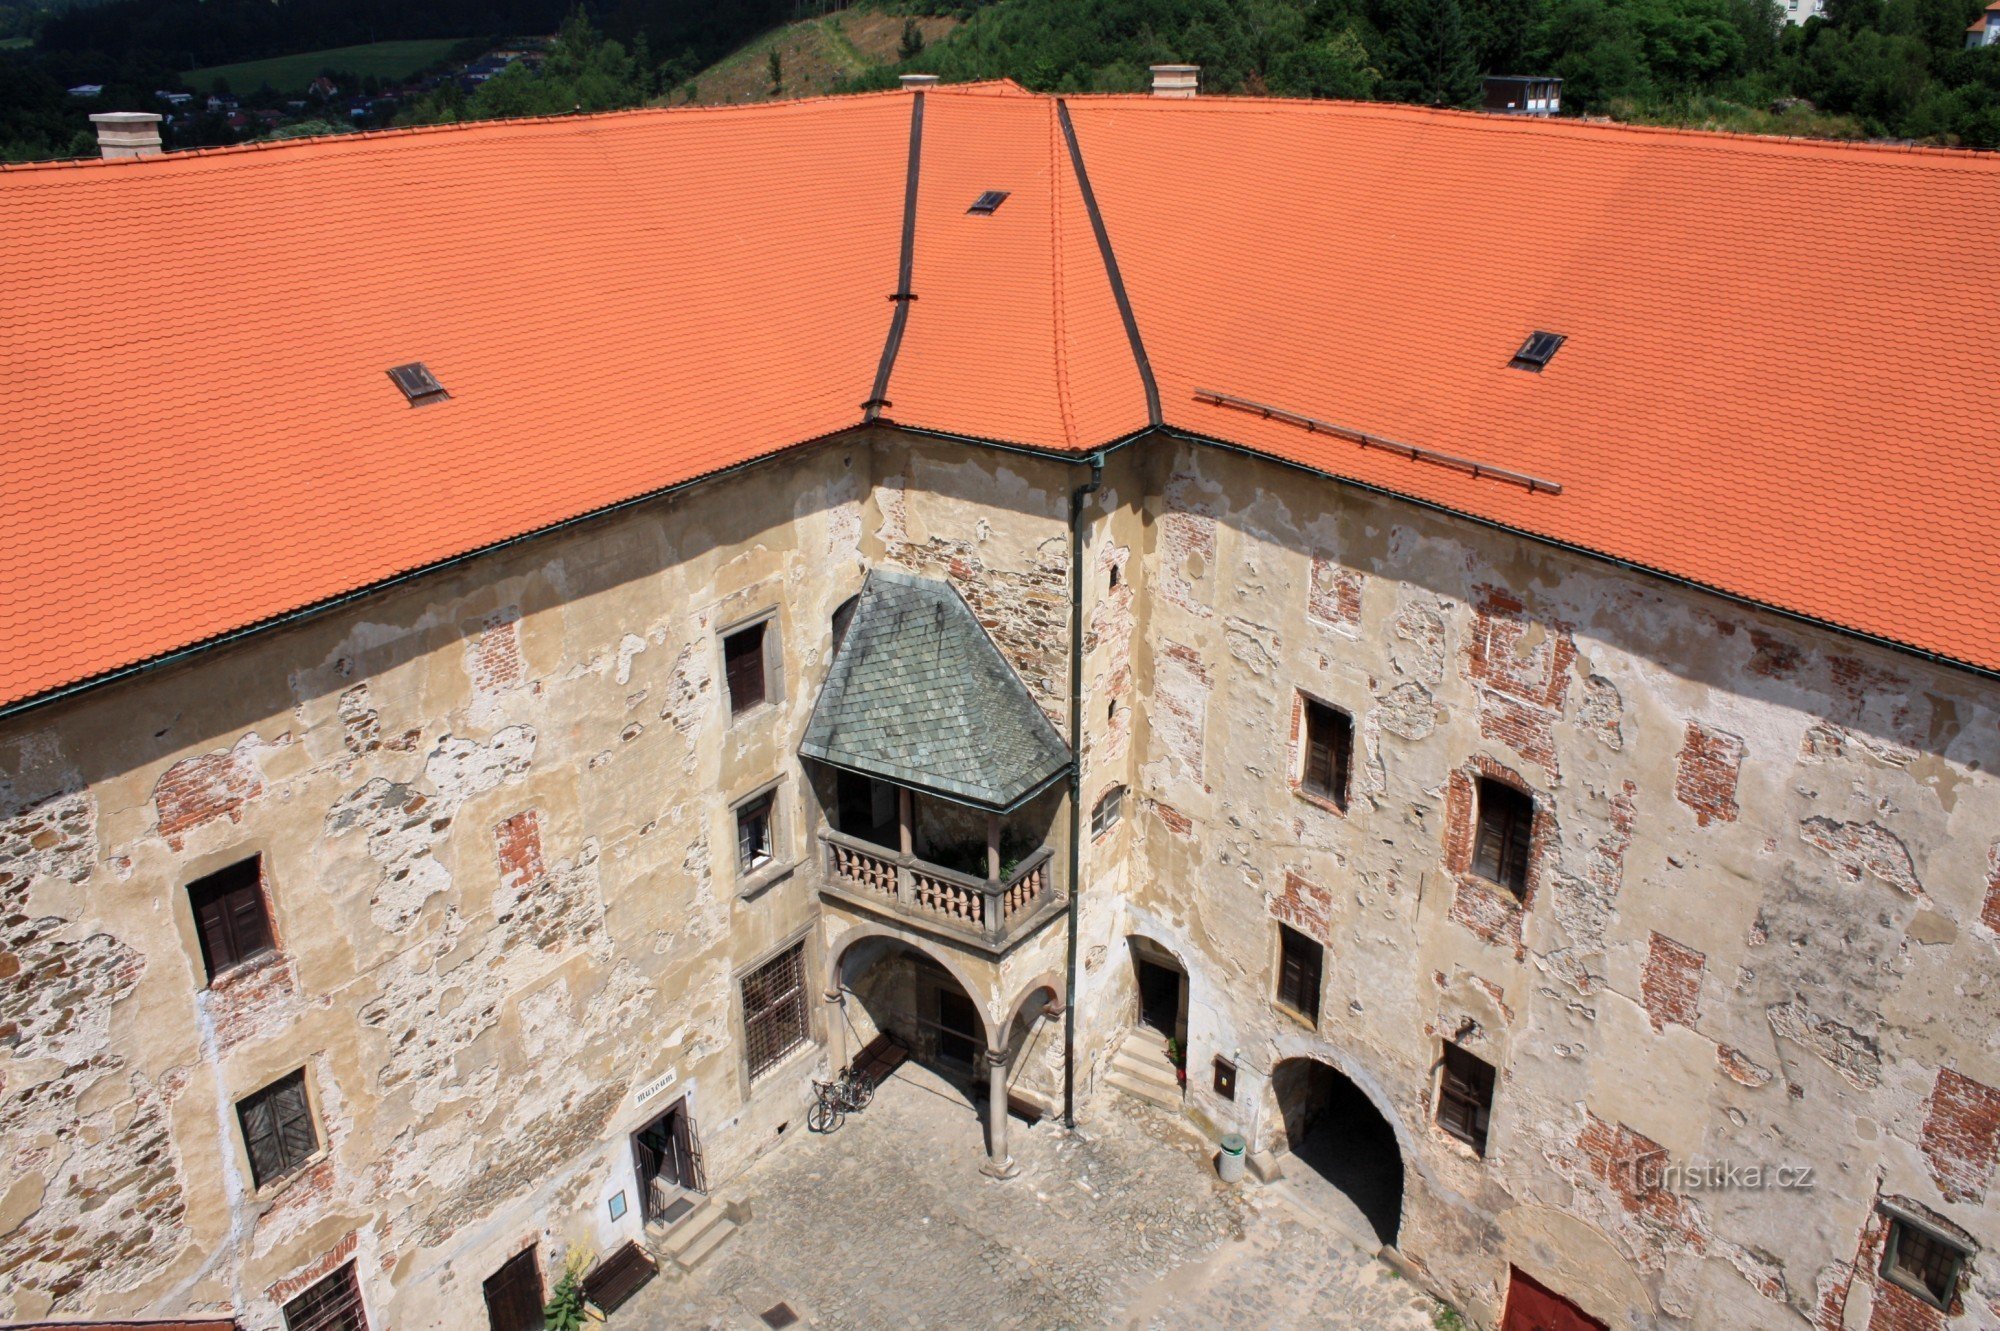 Castle courtyard from the tower